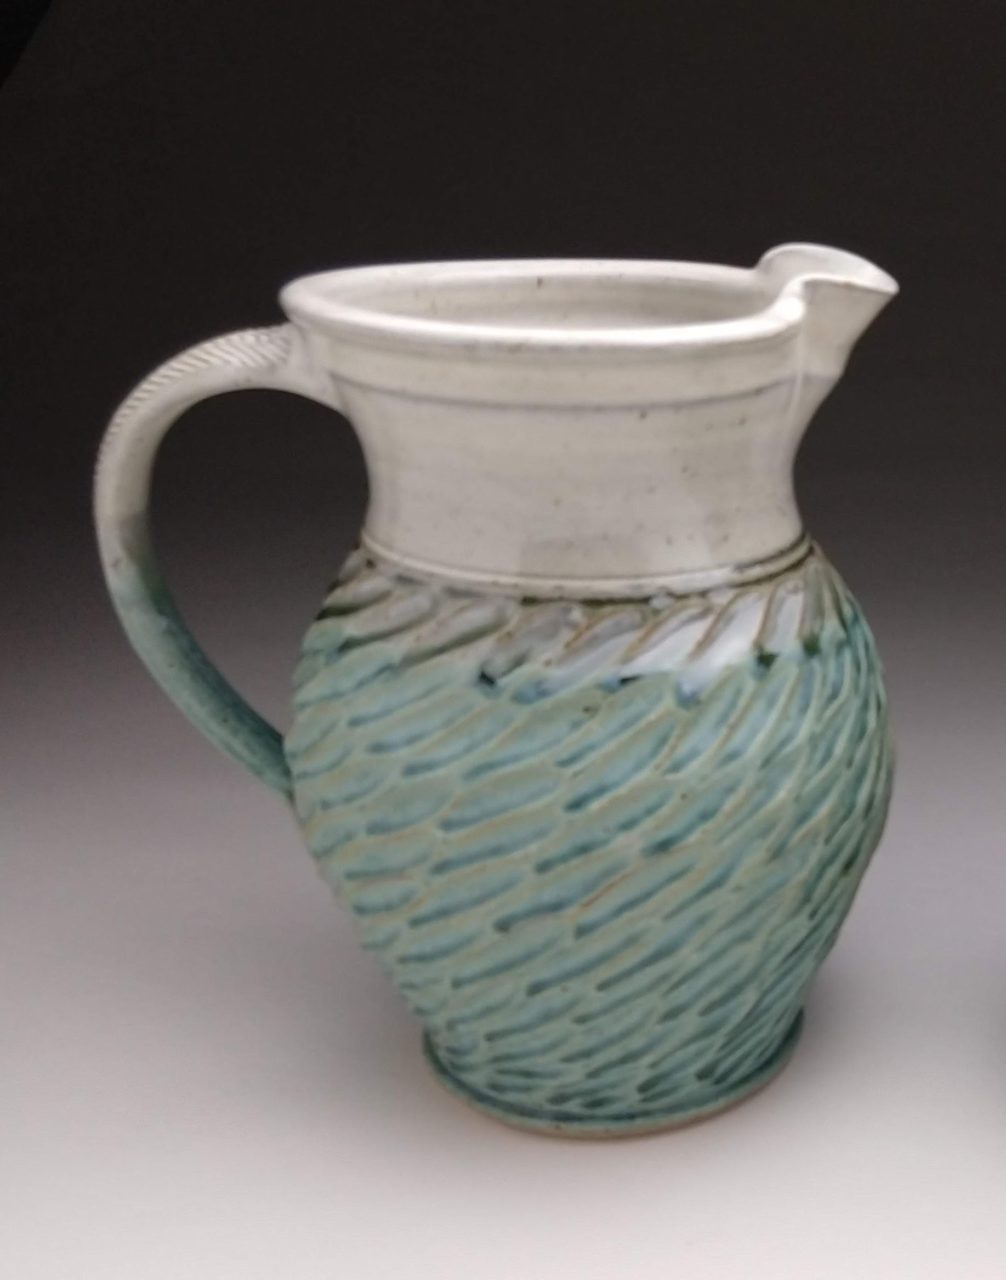 2 Quart Pitcher with Carved Design